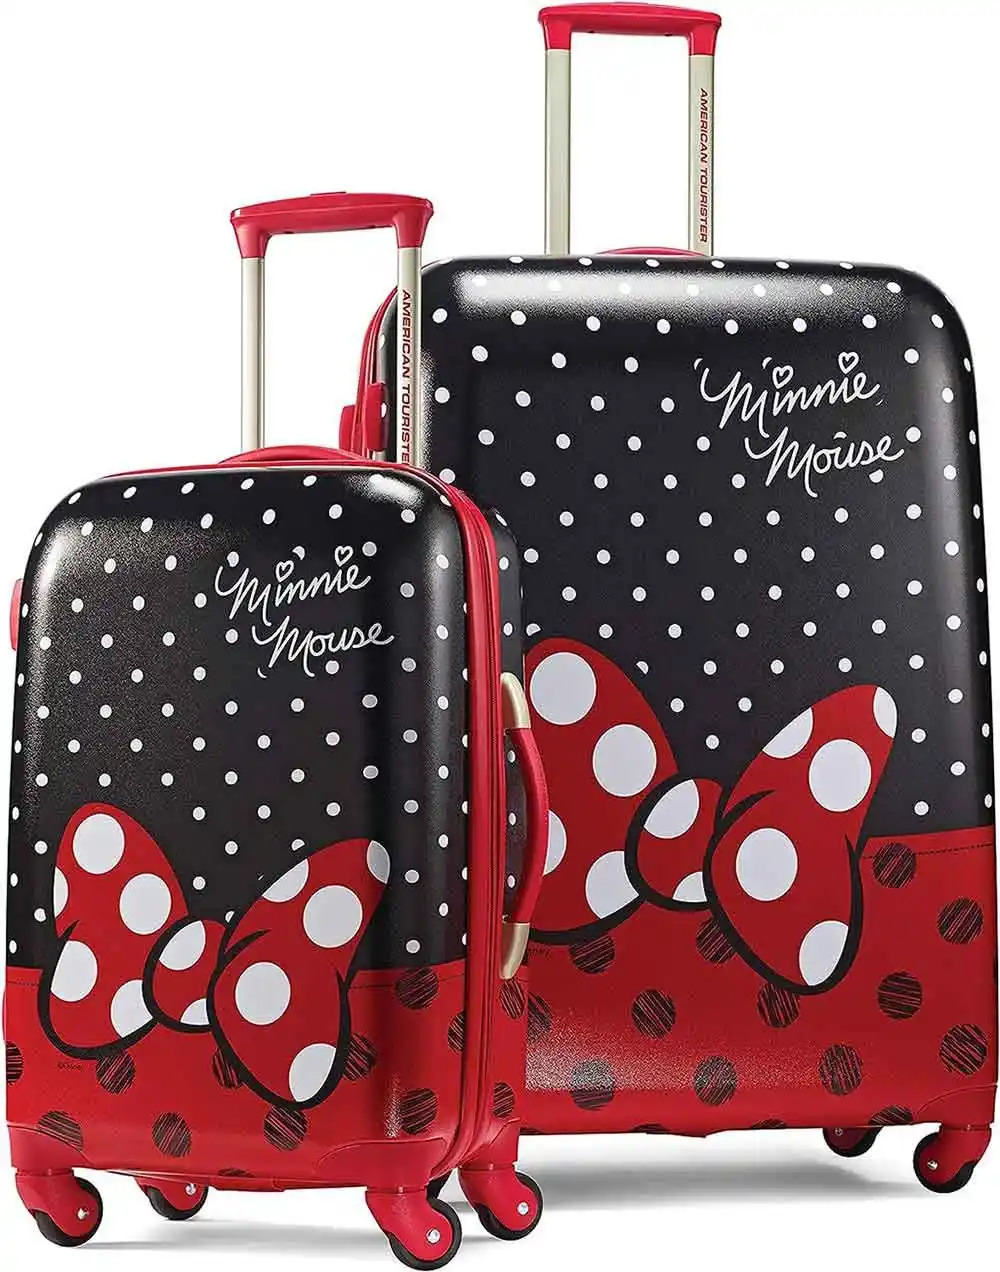 TOURISTER Kids' Disney Hardside Luggage with Spinner Wheels